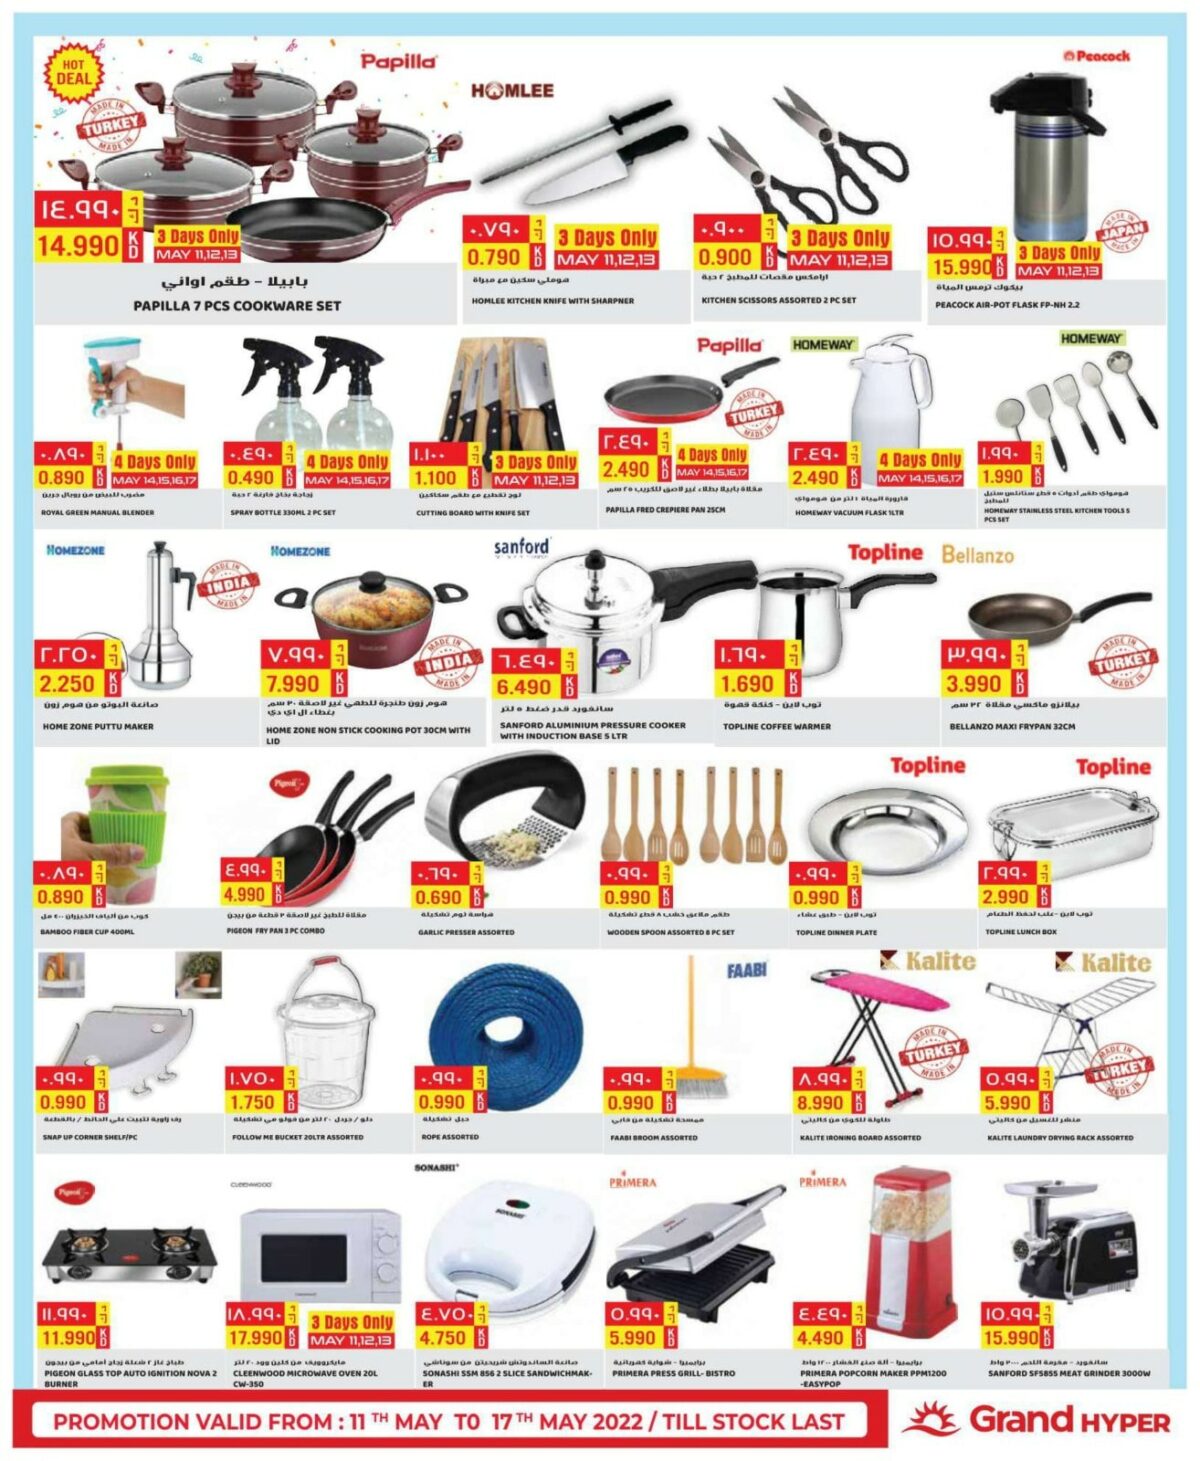 Grand Hypermarket Special Offers, iiQ8 weekly promotions 3